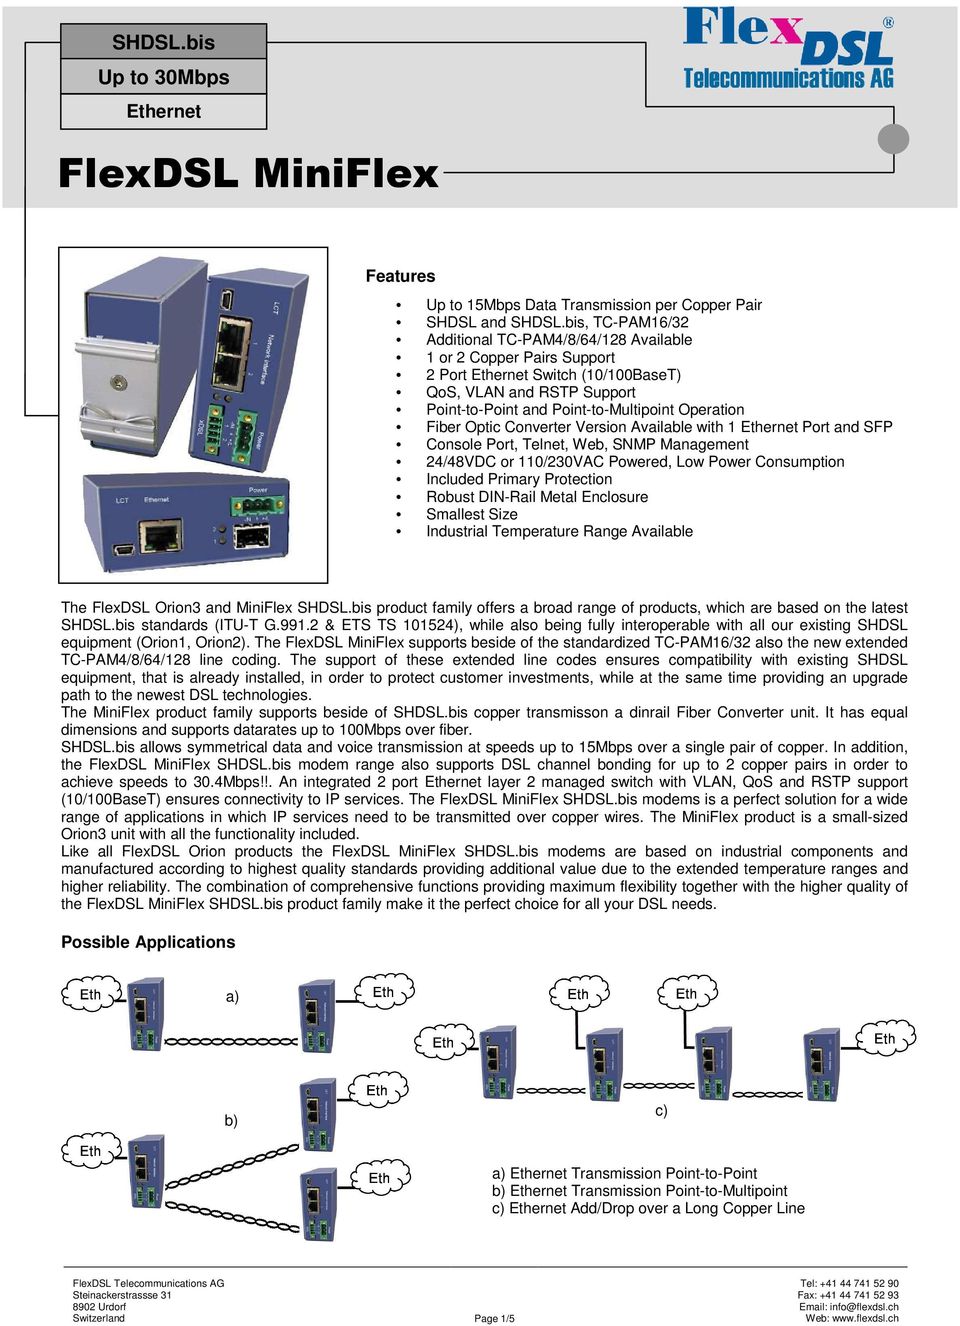 Fiber Optic Converter Version Available with 1 Ethernet Port and SFP Console Port, Telnet, Web, SNMP Management 24/48VDC or 110/230VAC Powered, Low Power Consumption Included Primary Protection